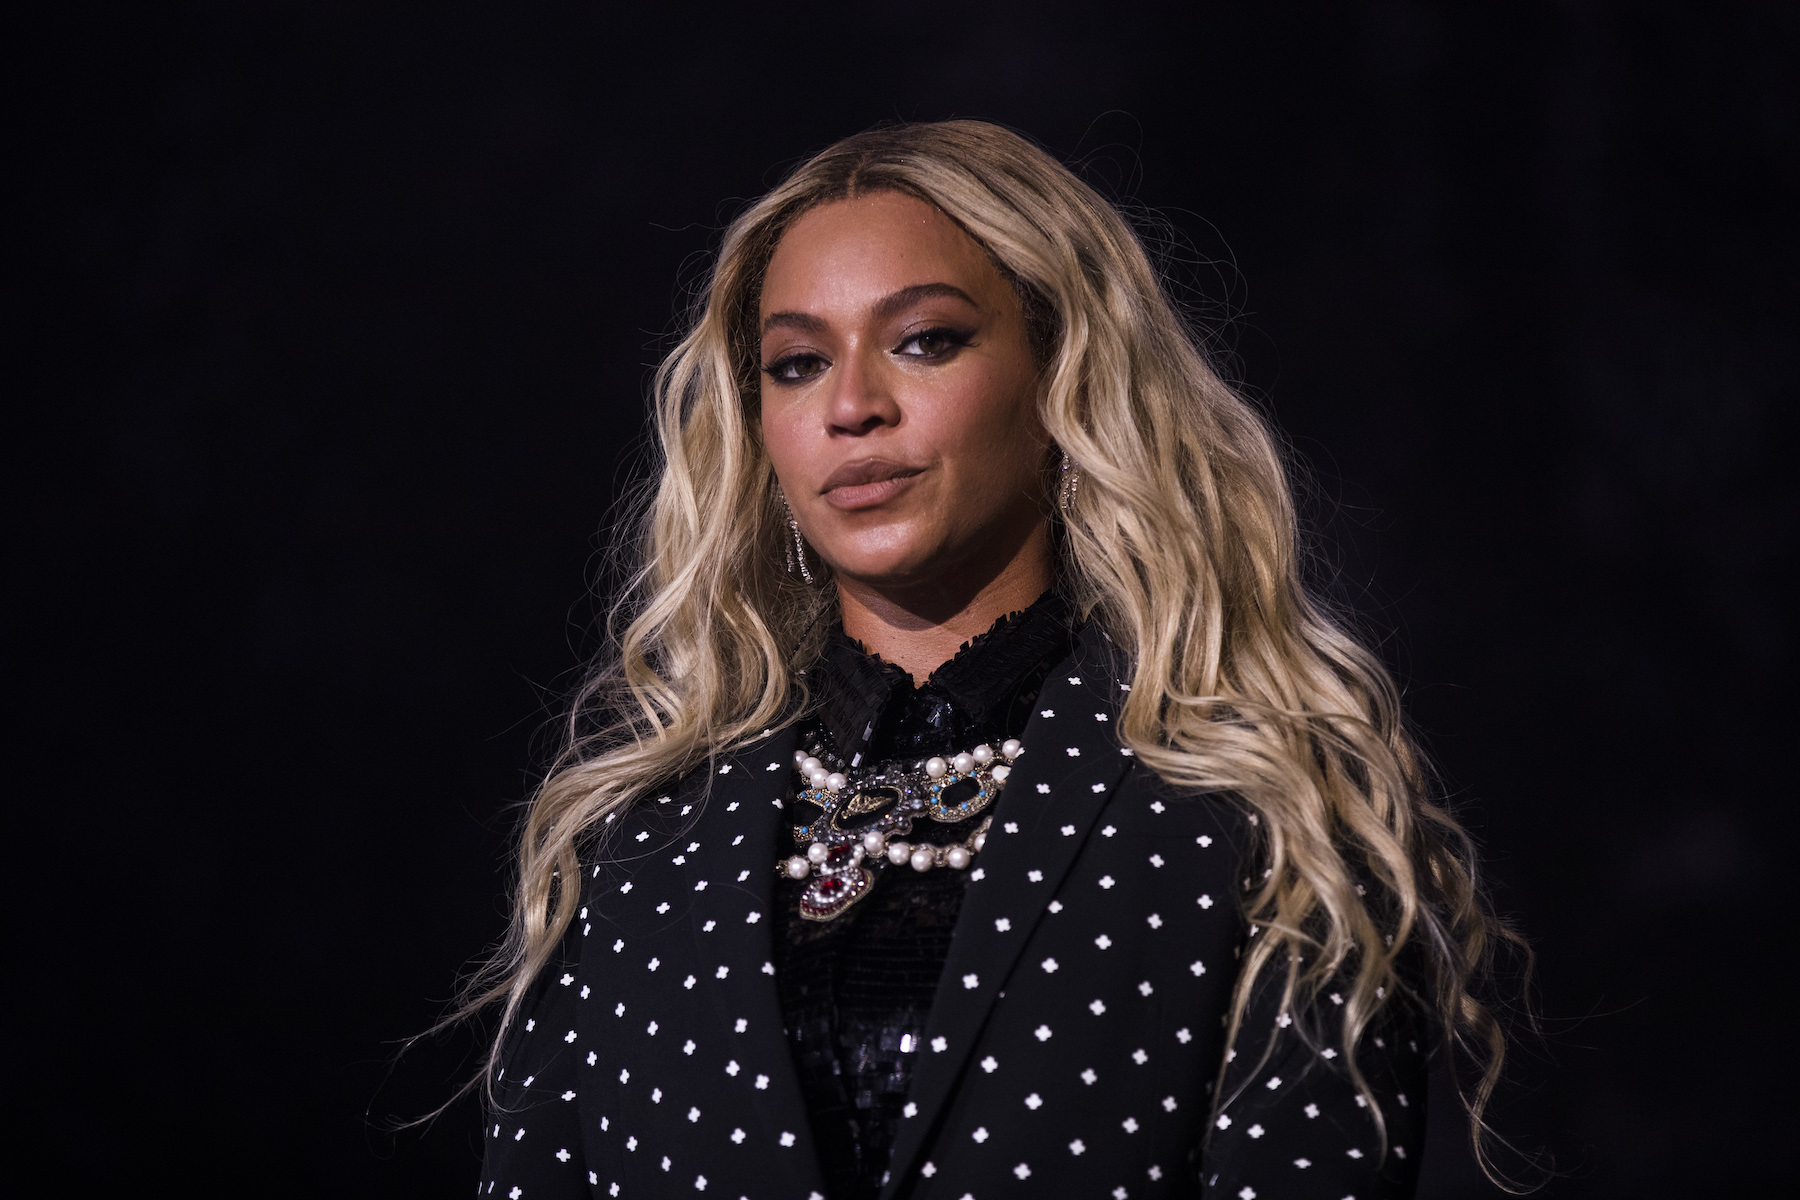 Beyoncé performs at a concert for Democratic Presidential candidate Hillary Clinton